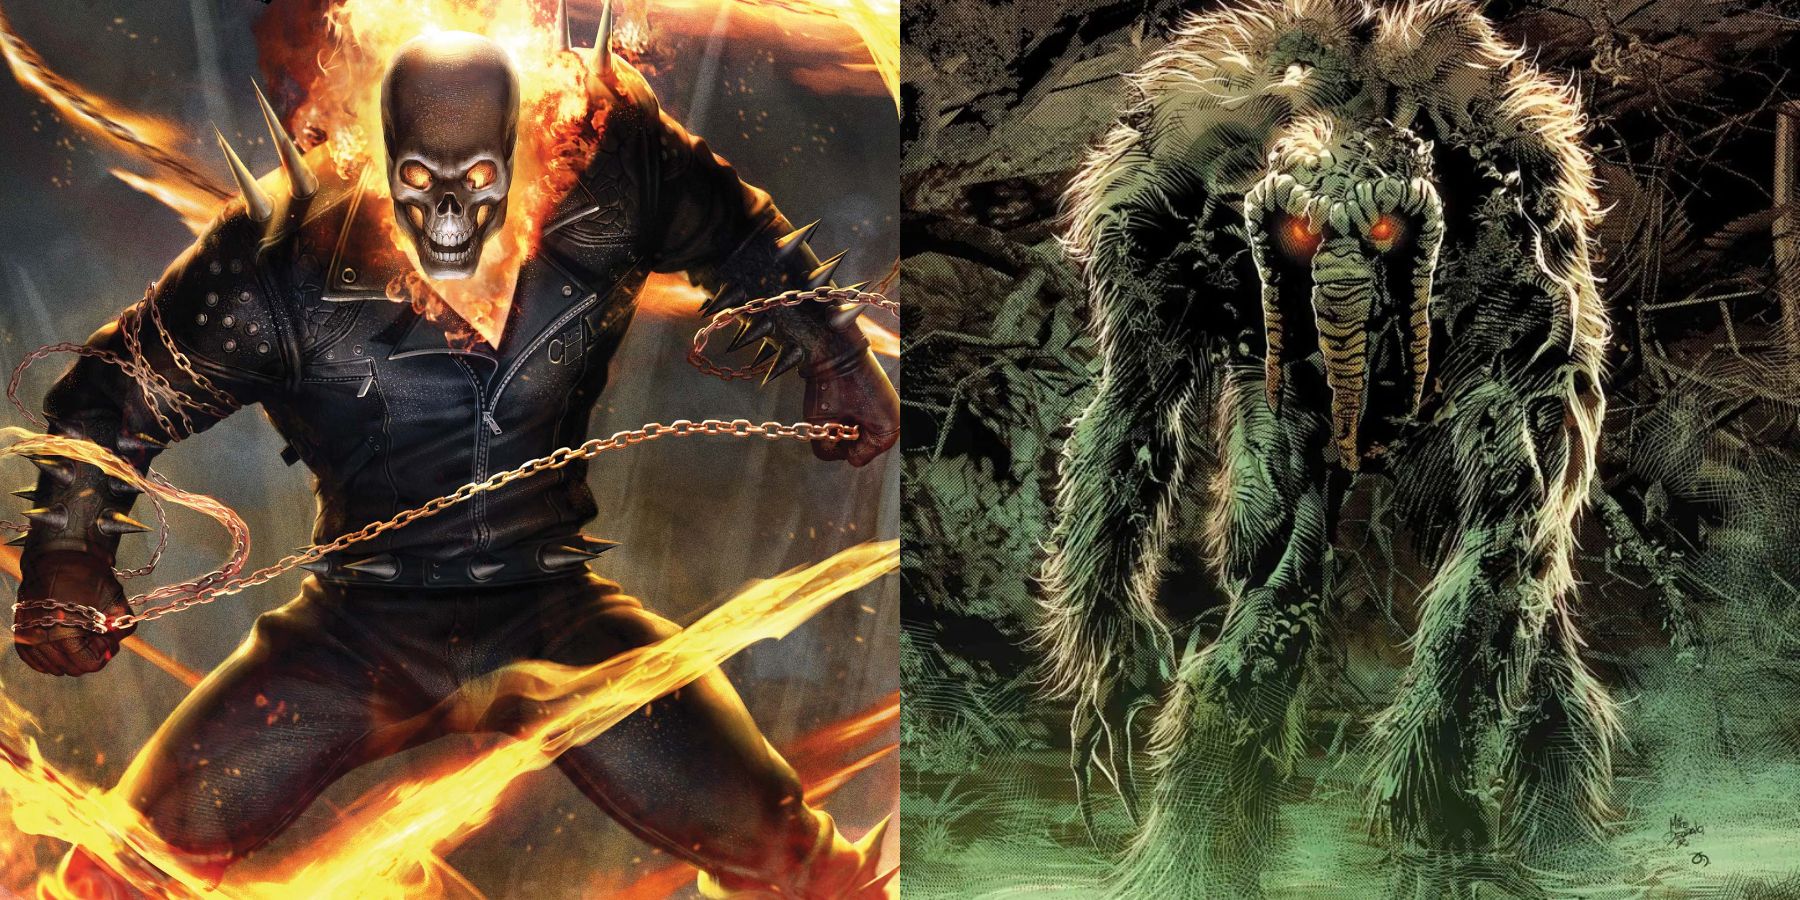 5 Characters That Should Show Up In Marvel's Halloween Special